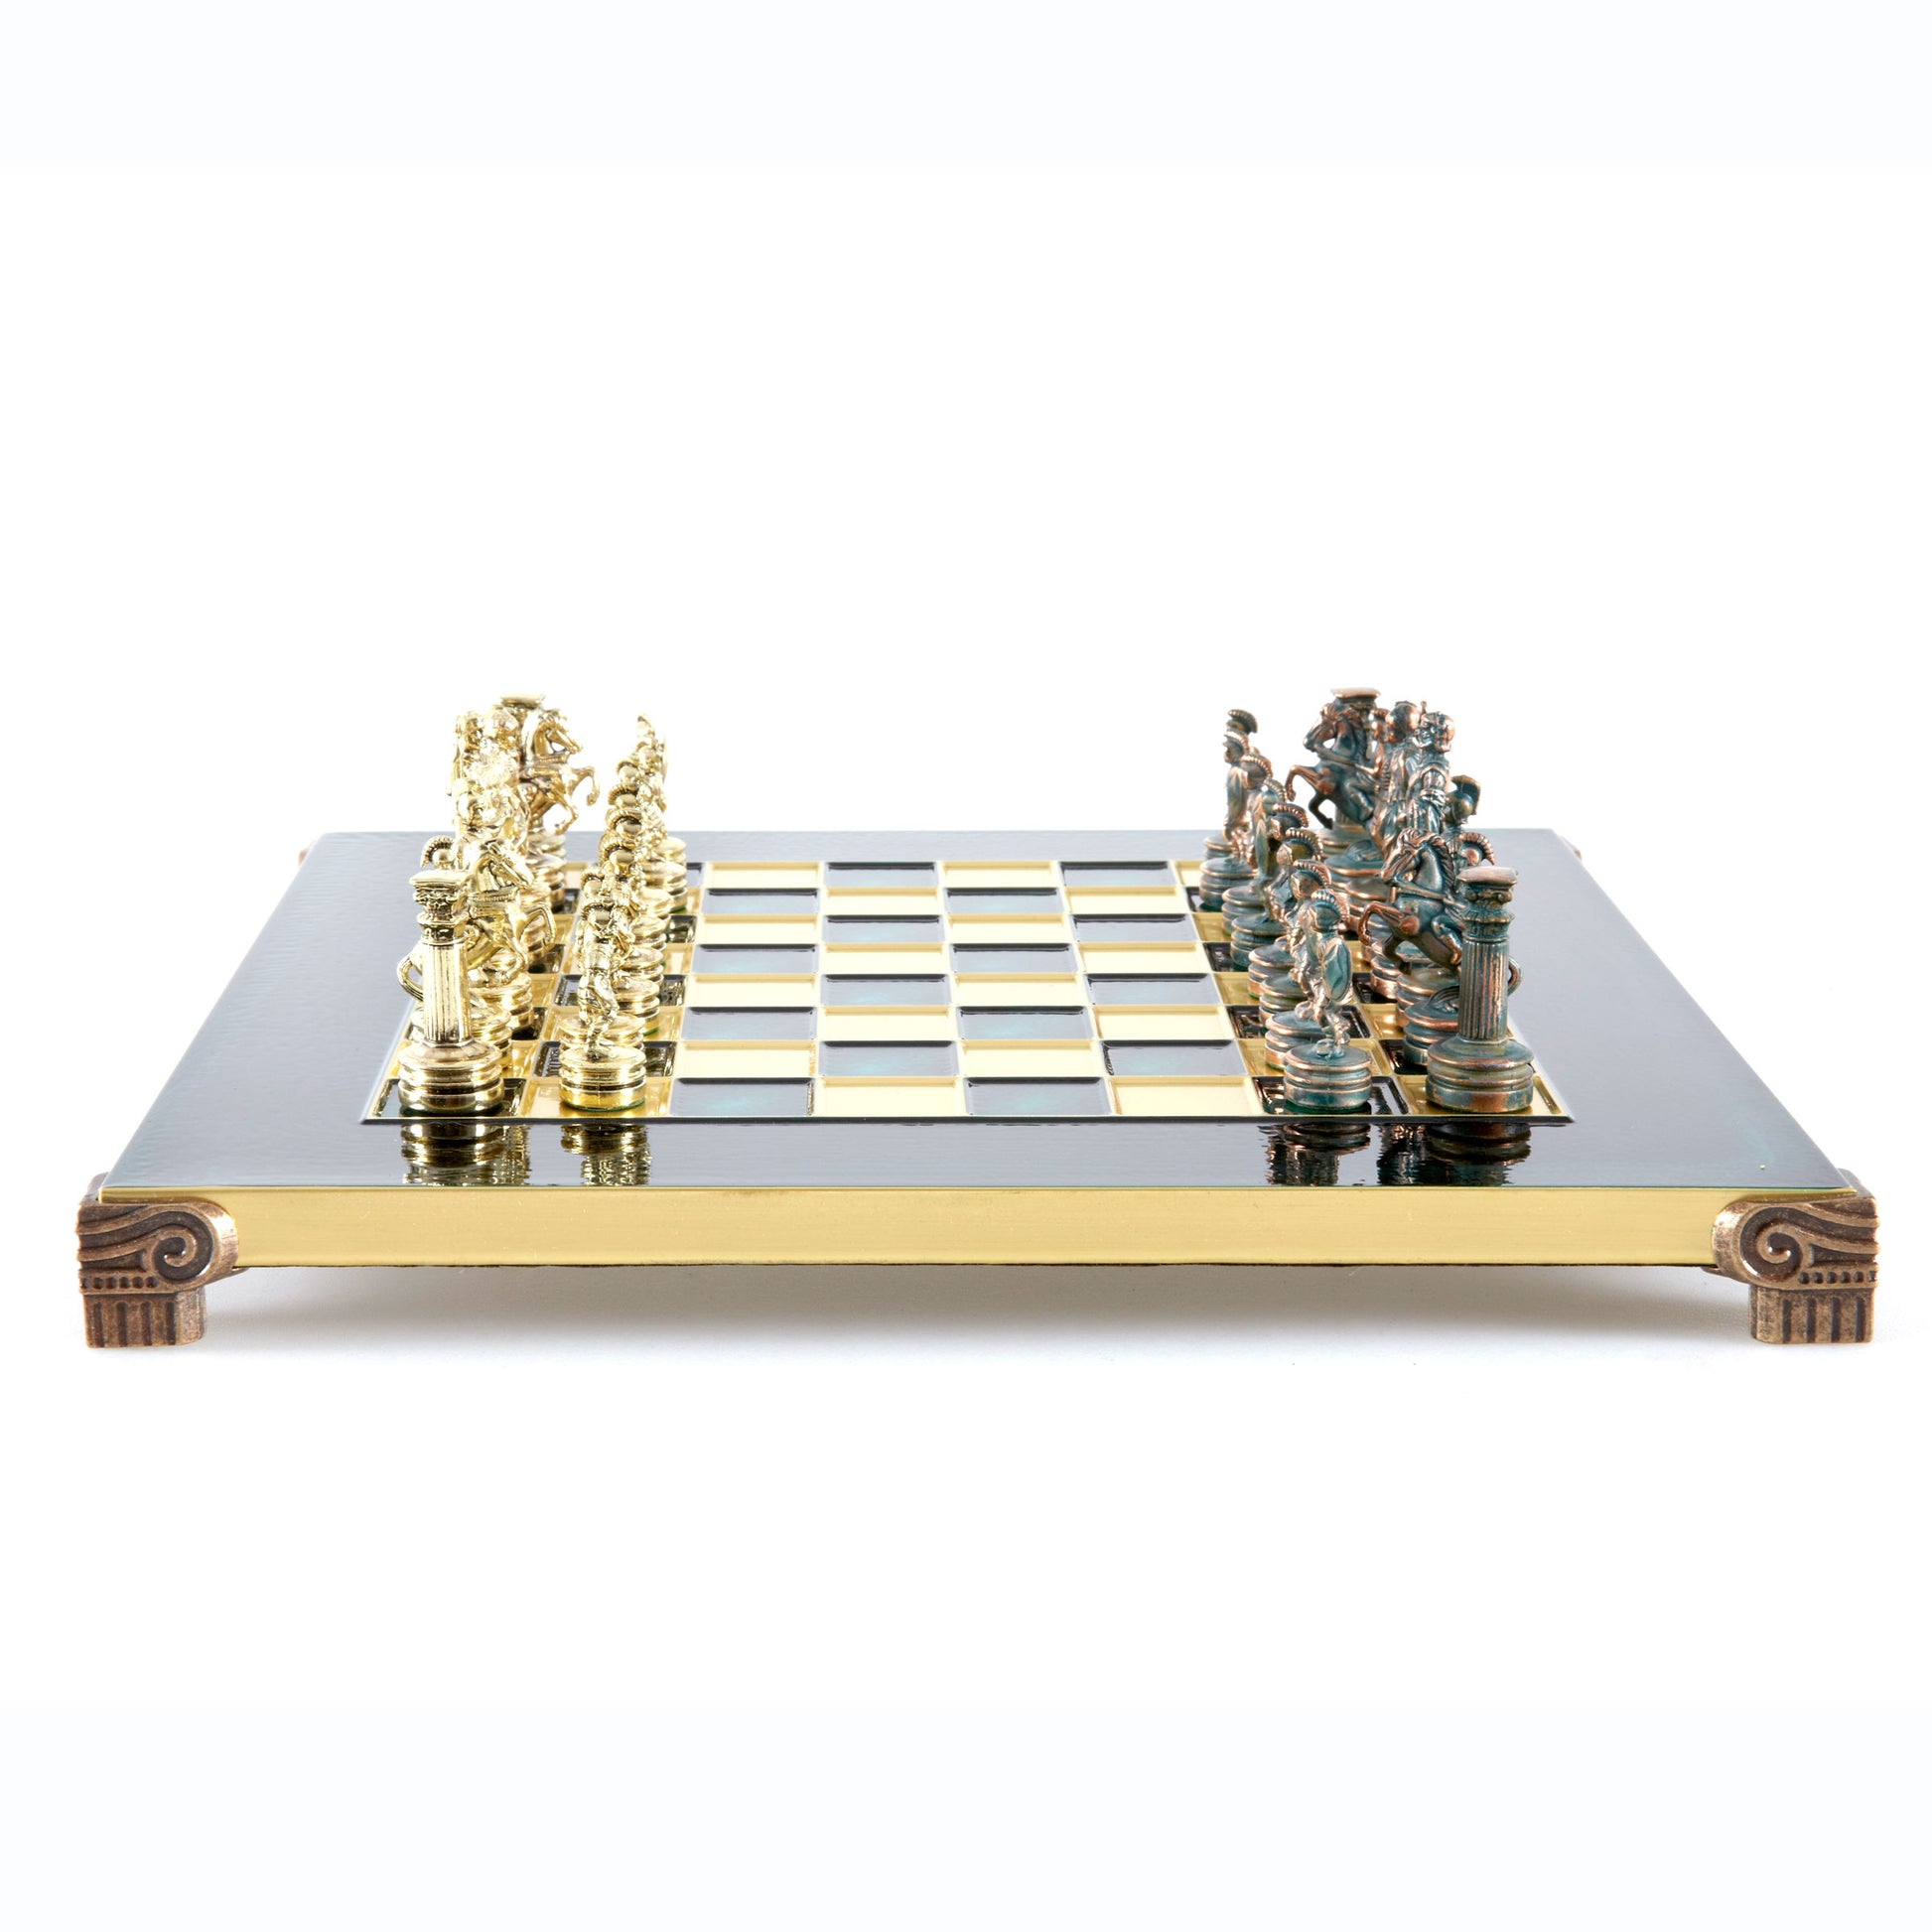 GREEK ROMAN PERIOD CHESS SET with gold/green chessmen and bronze chessboard 28 x 28cm (Small) - Premium Chess from MANOPOULOS Chess & Backgammon - Just €163! Shop now at MANOPOULOS Chess & Backgammon